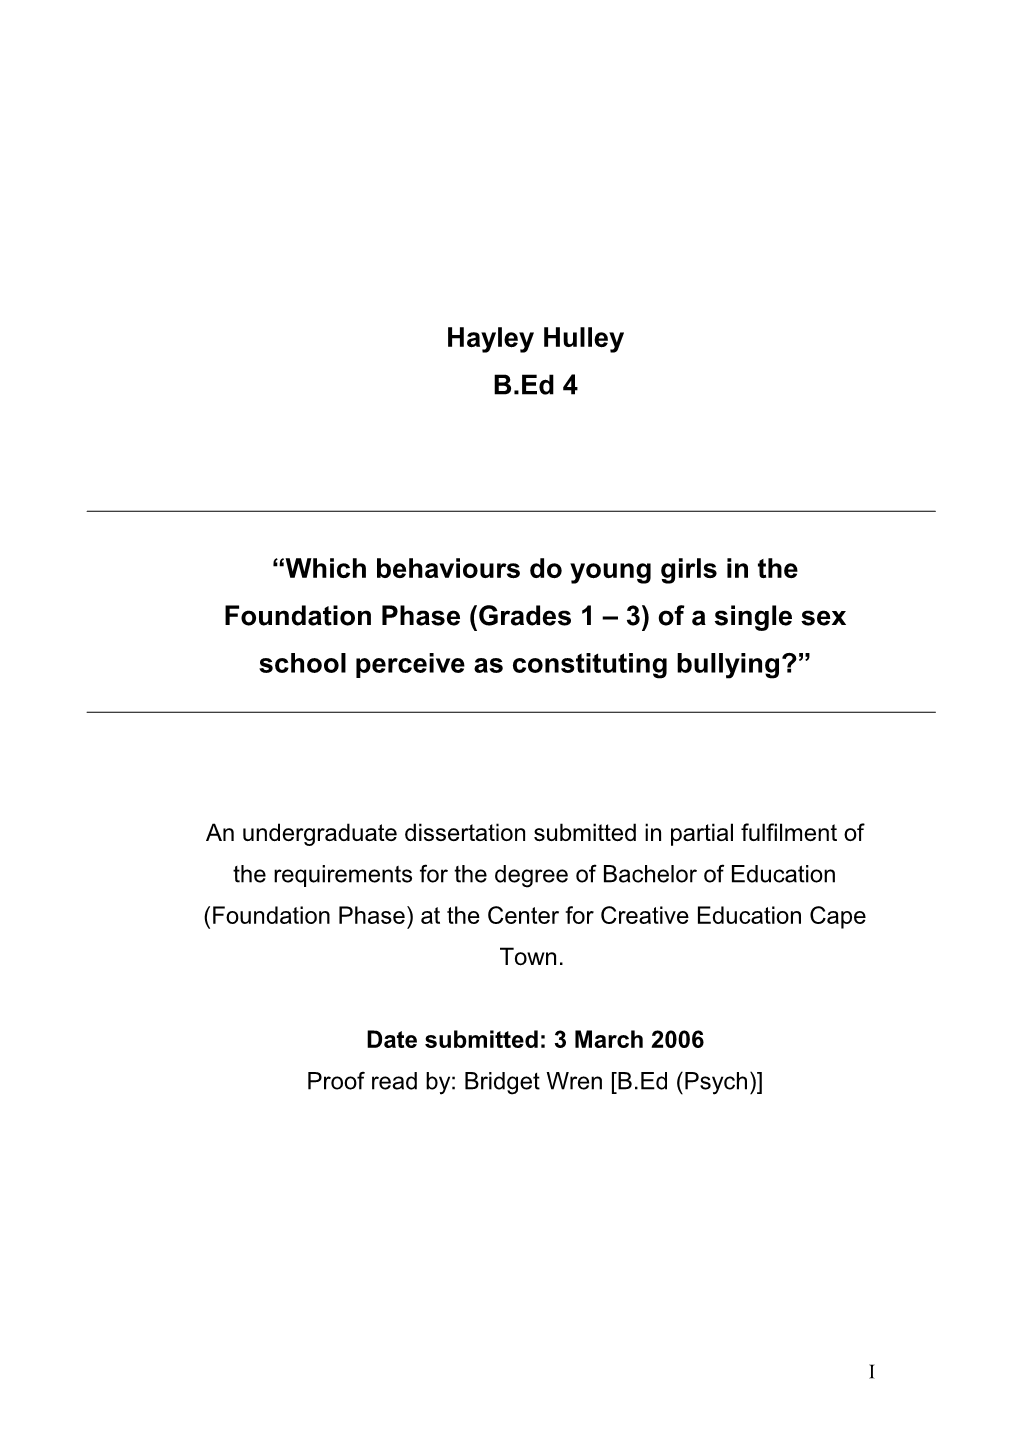 RESEARCH PROPOSAL Hayley Hulley B